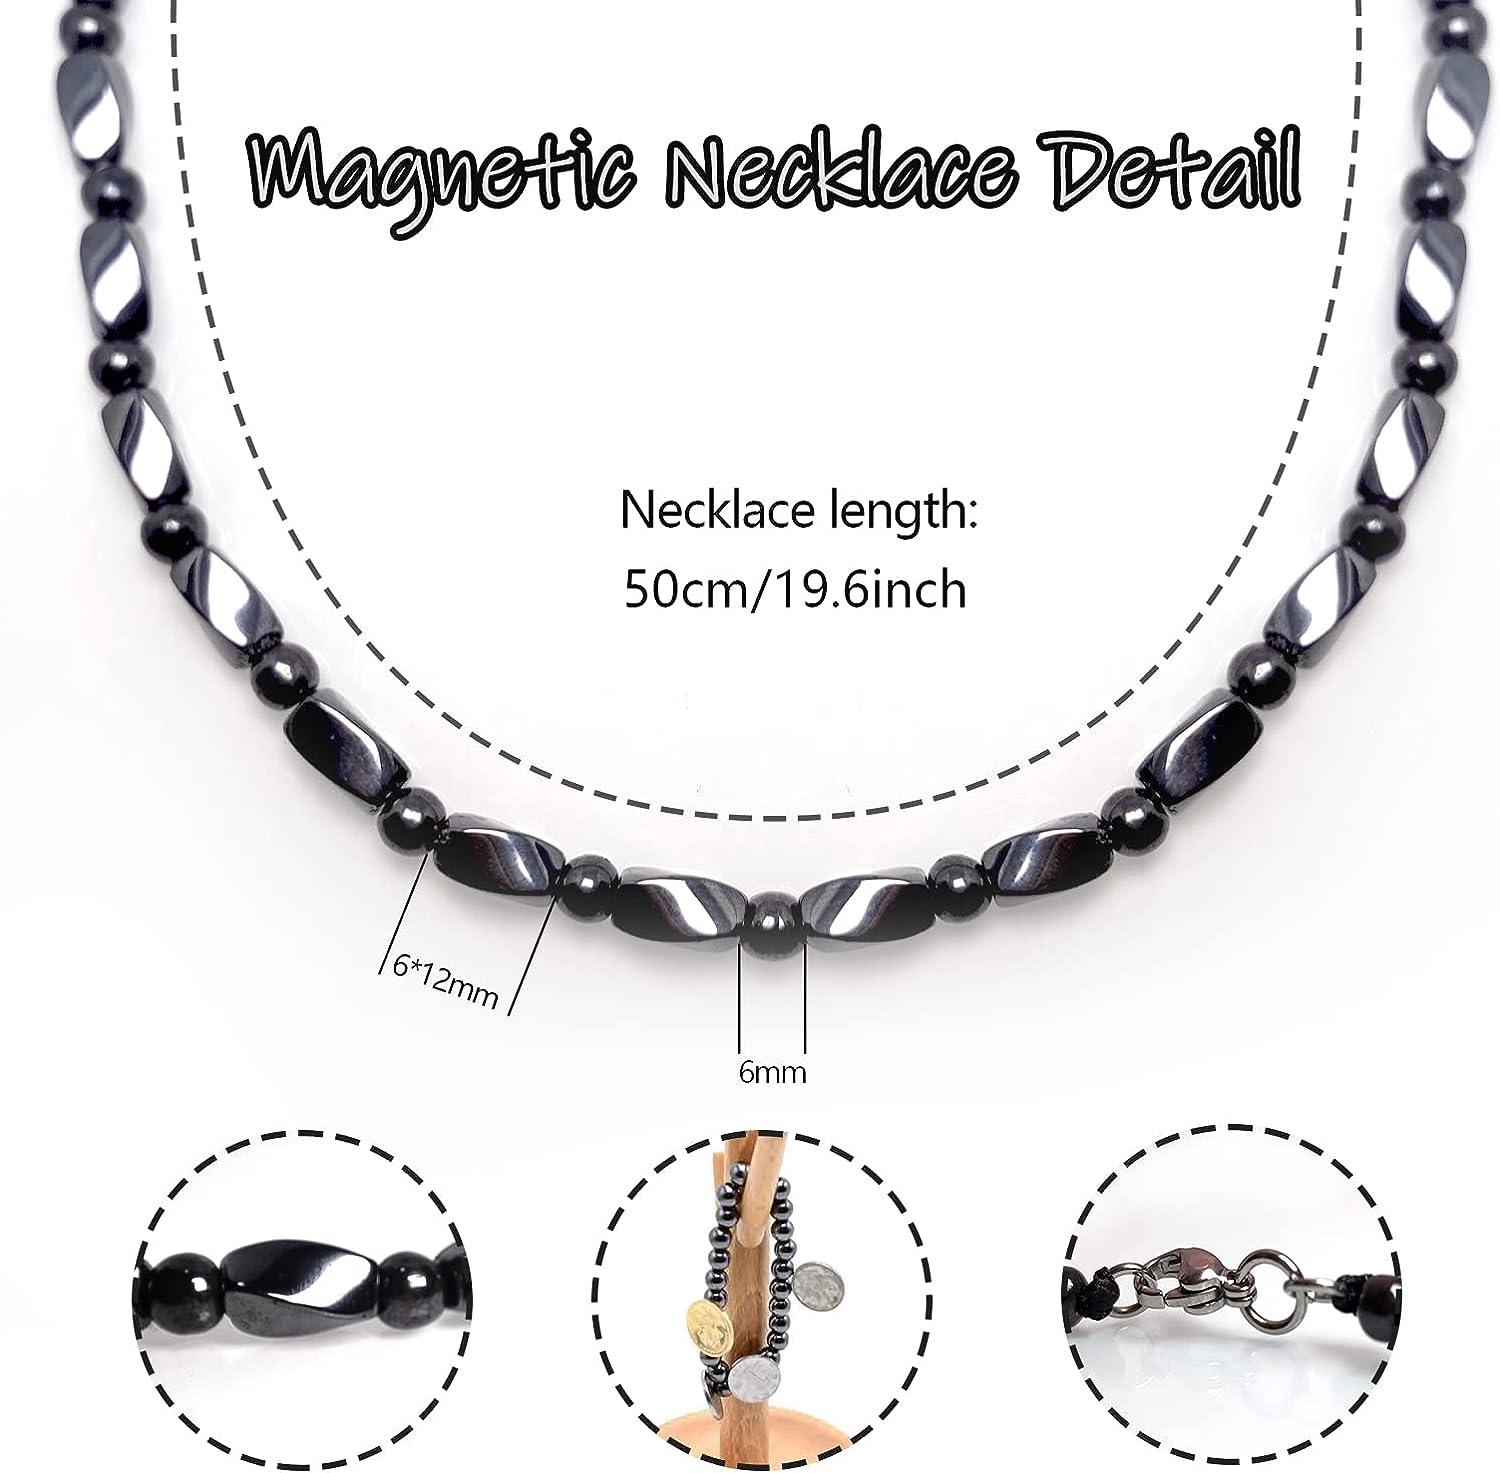 Magnetic Therapy Necklace Hematite Necklace Black Obsidian Magnetic Necklace-Natural  Pain Relief for Neck Arthritis, Back, Shoulder Pain, Headache Migraine  Healing Magnets Necklace for Women/Men Magnetic Hematite & Black Obsidian